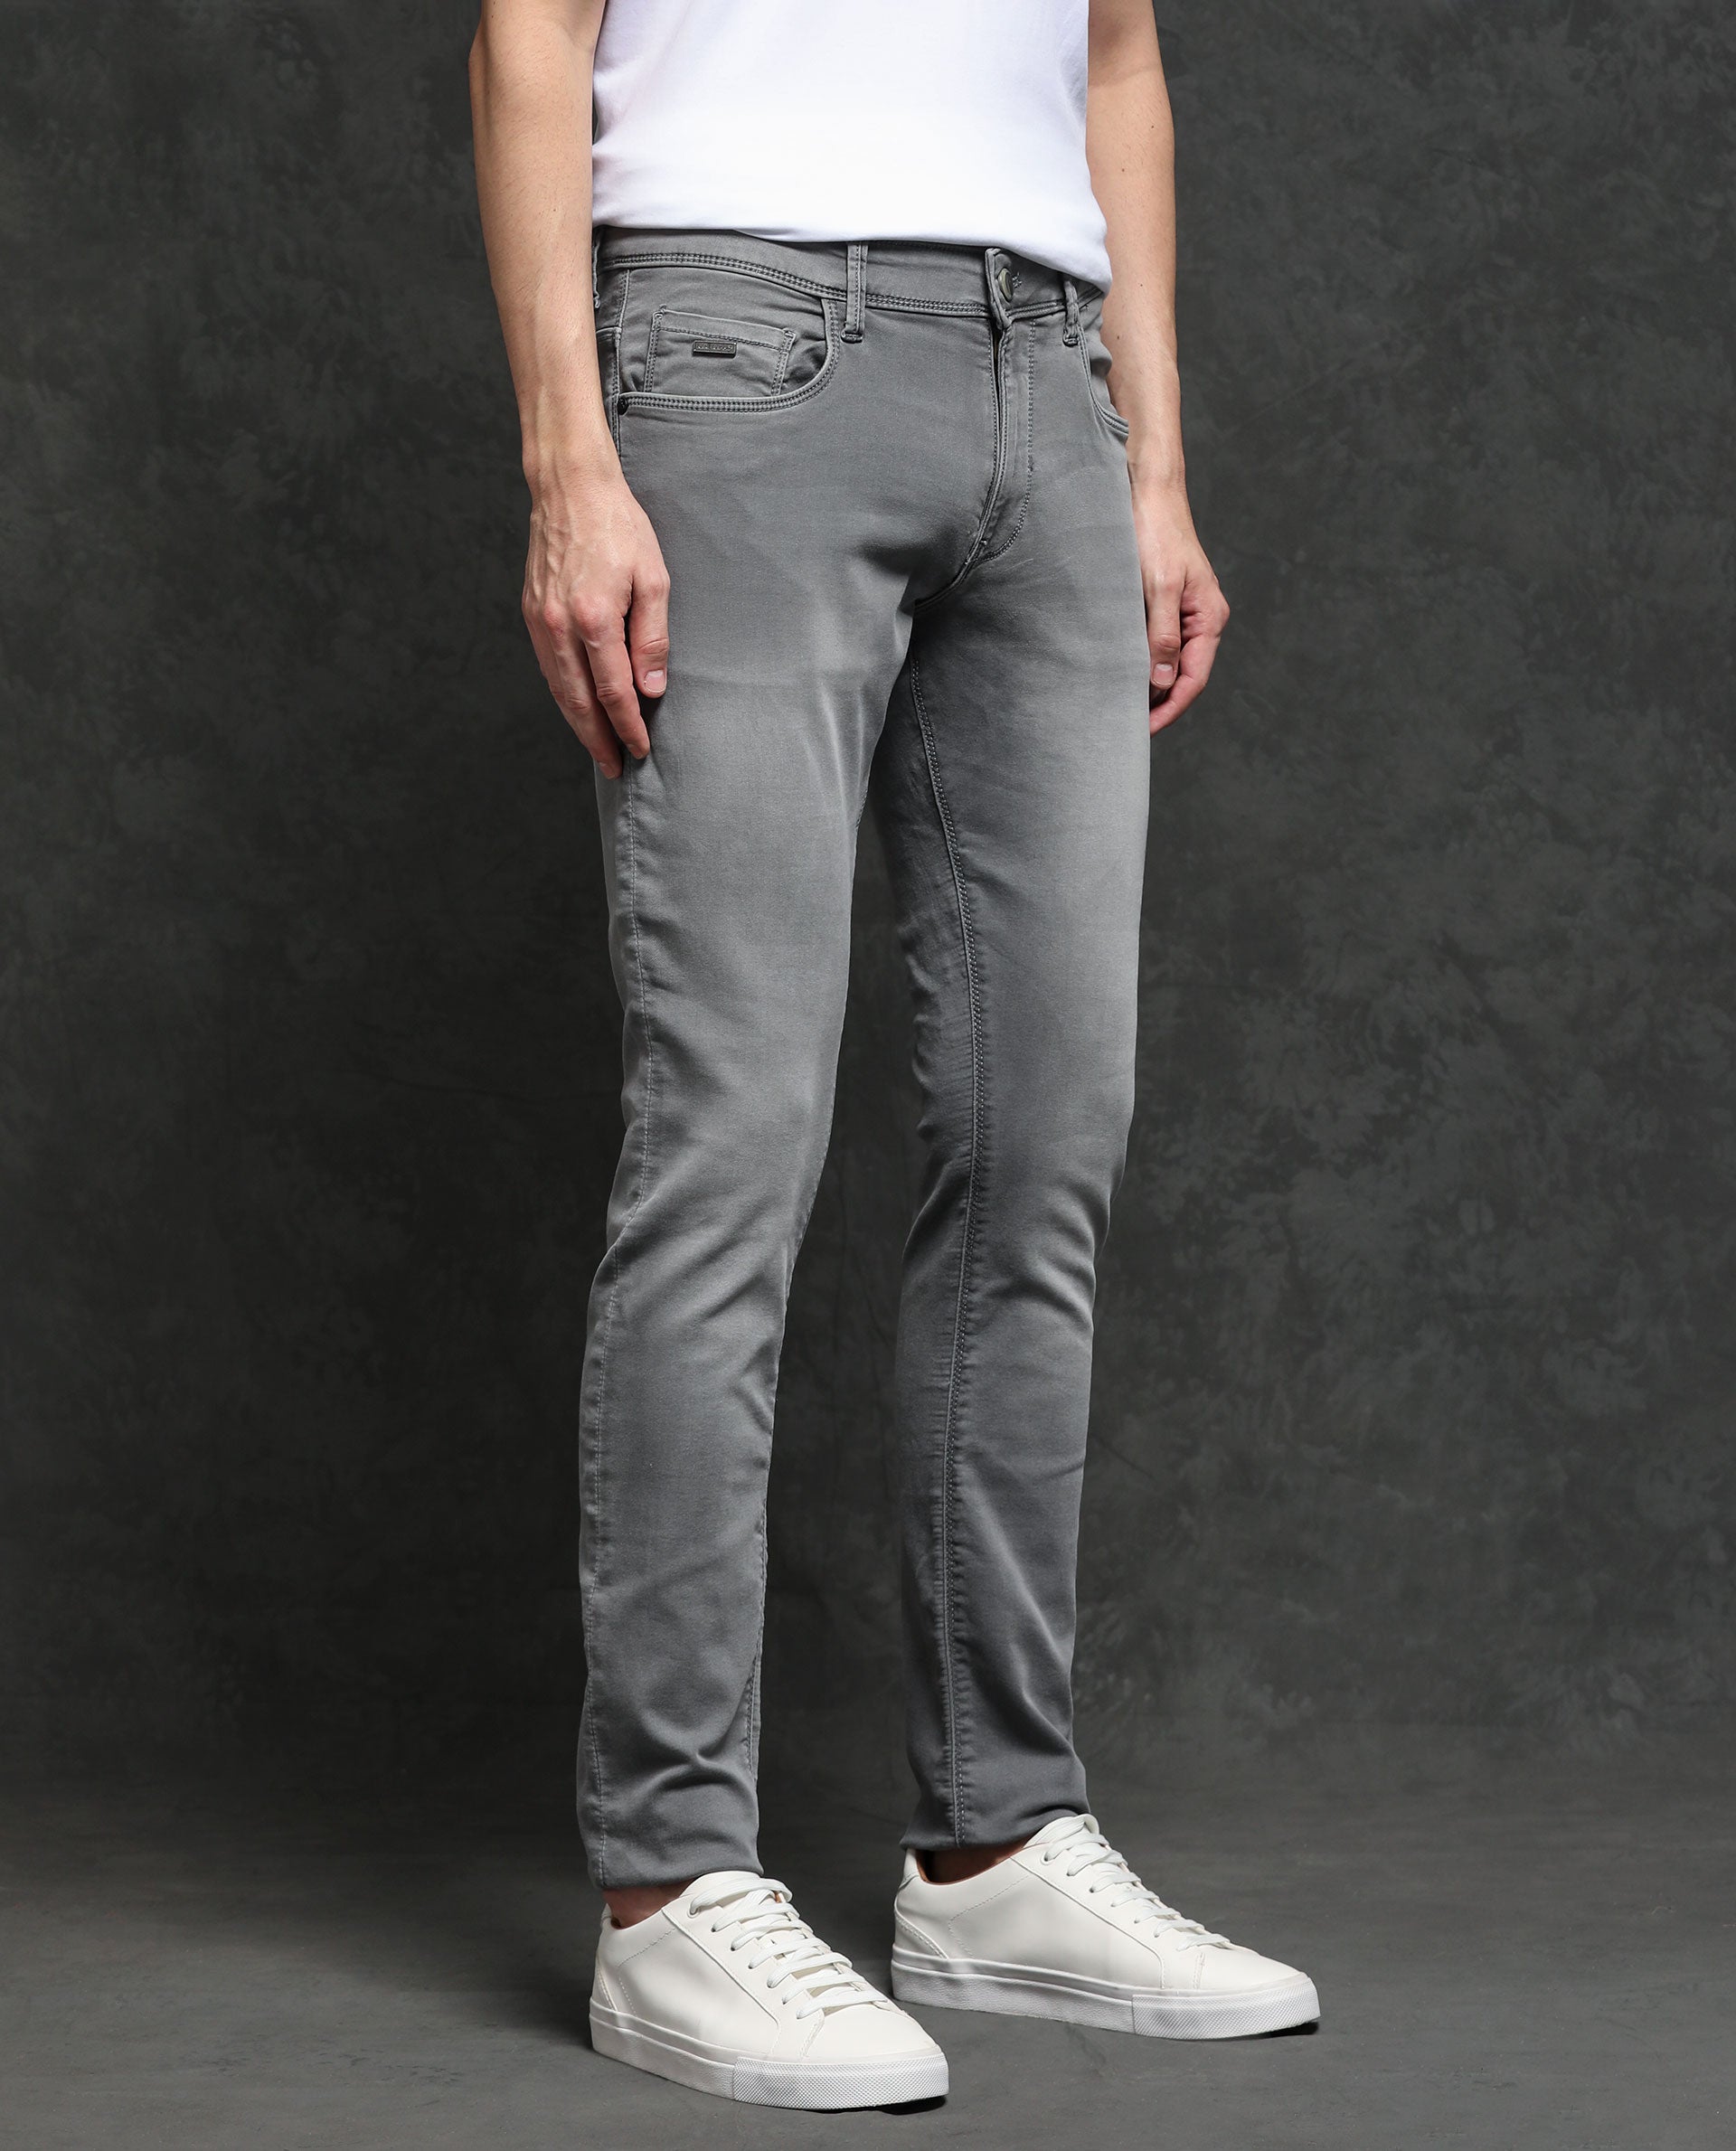 Buy Grey Ankle Length Original Stretch Jeans Online at Muftijeans